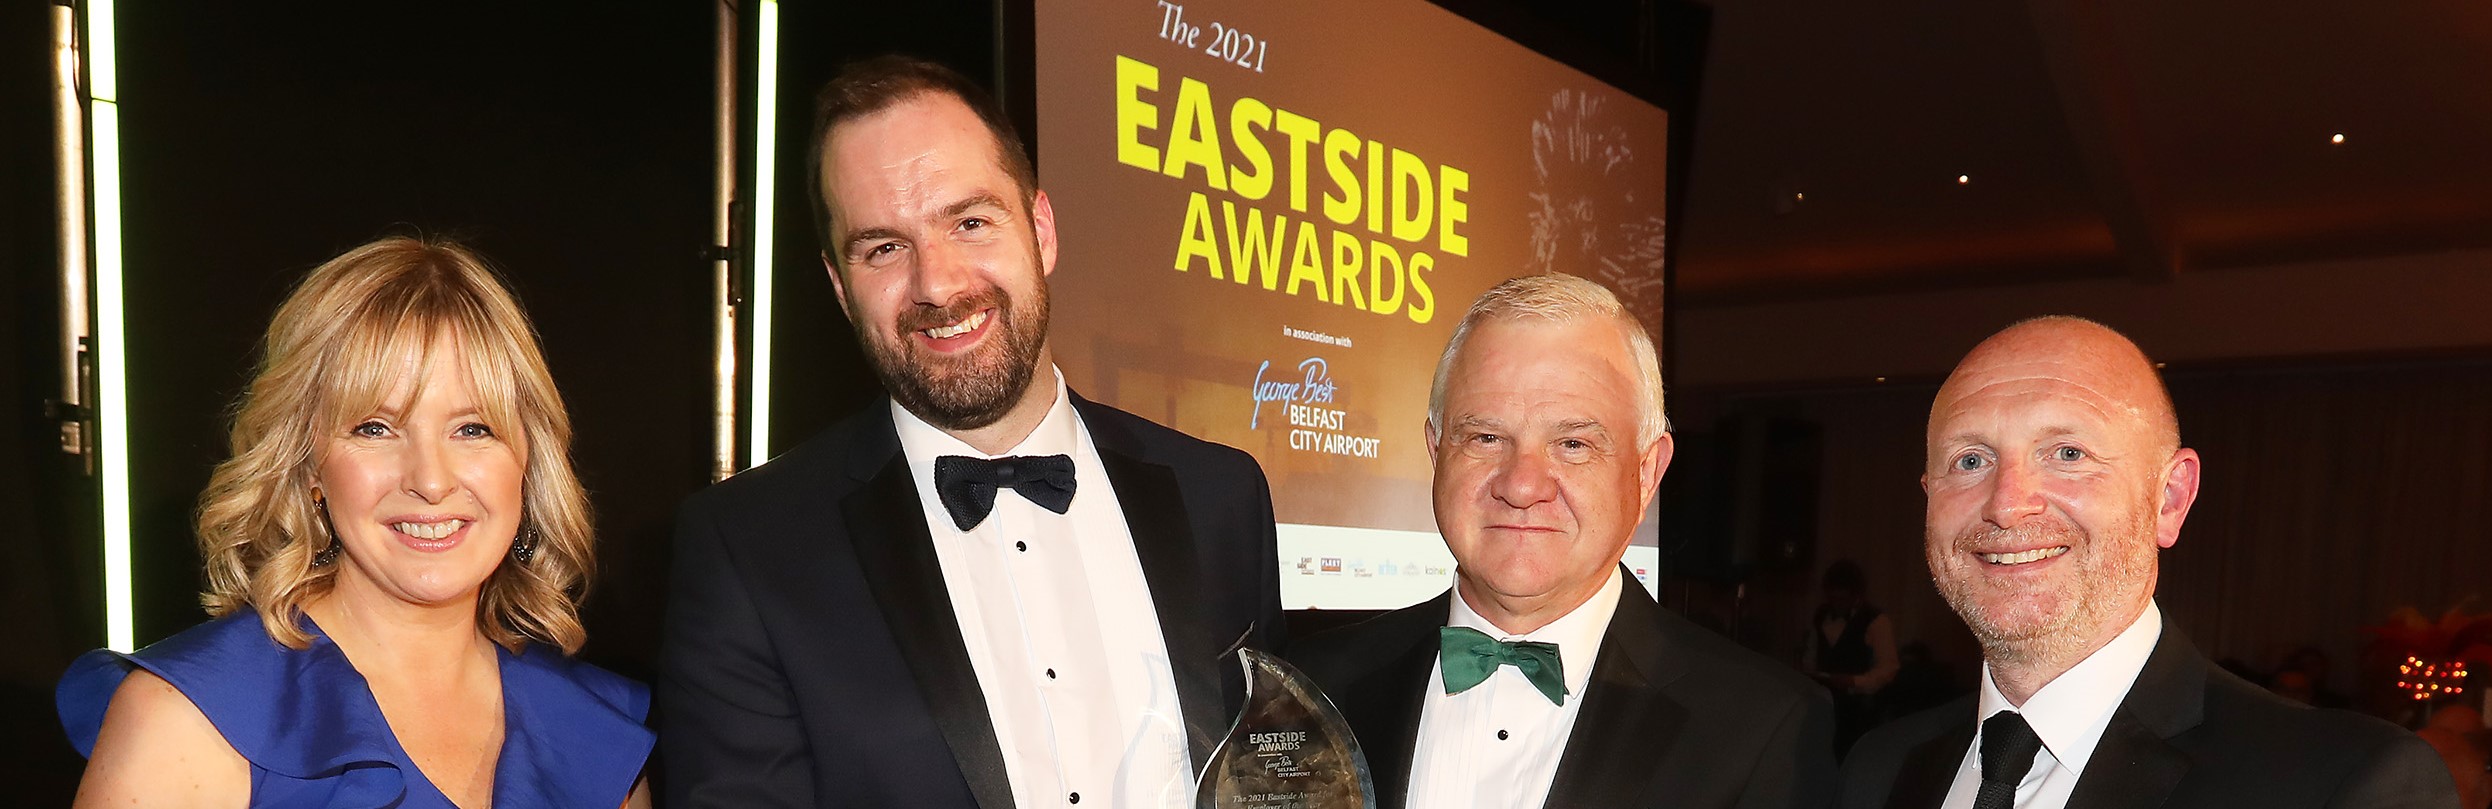 Pacem Double-Winners at the 2022 Eastside Awards